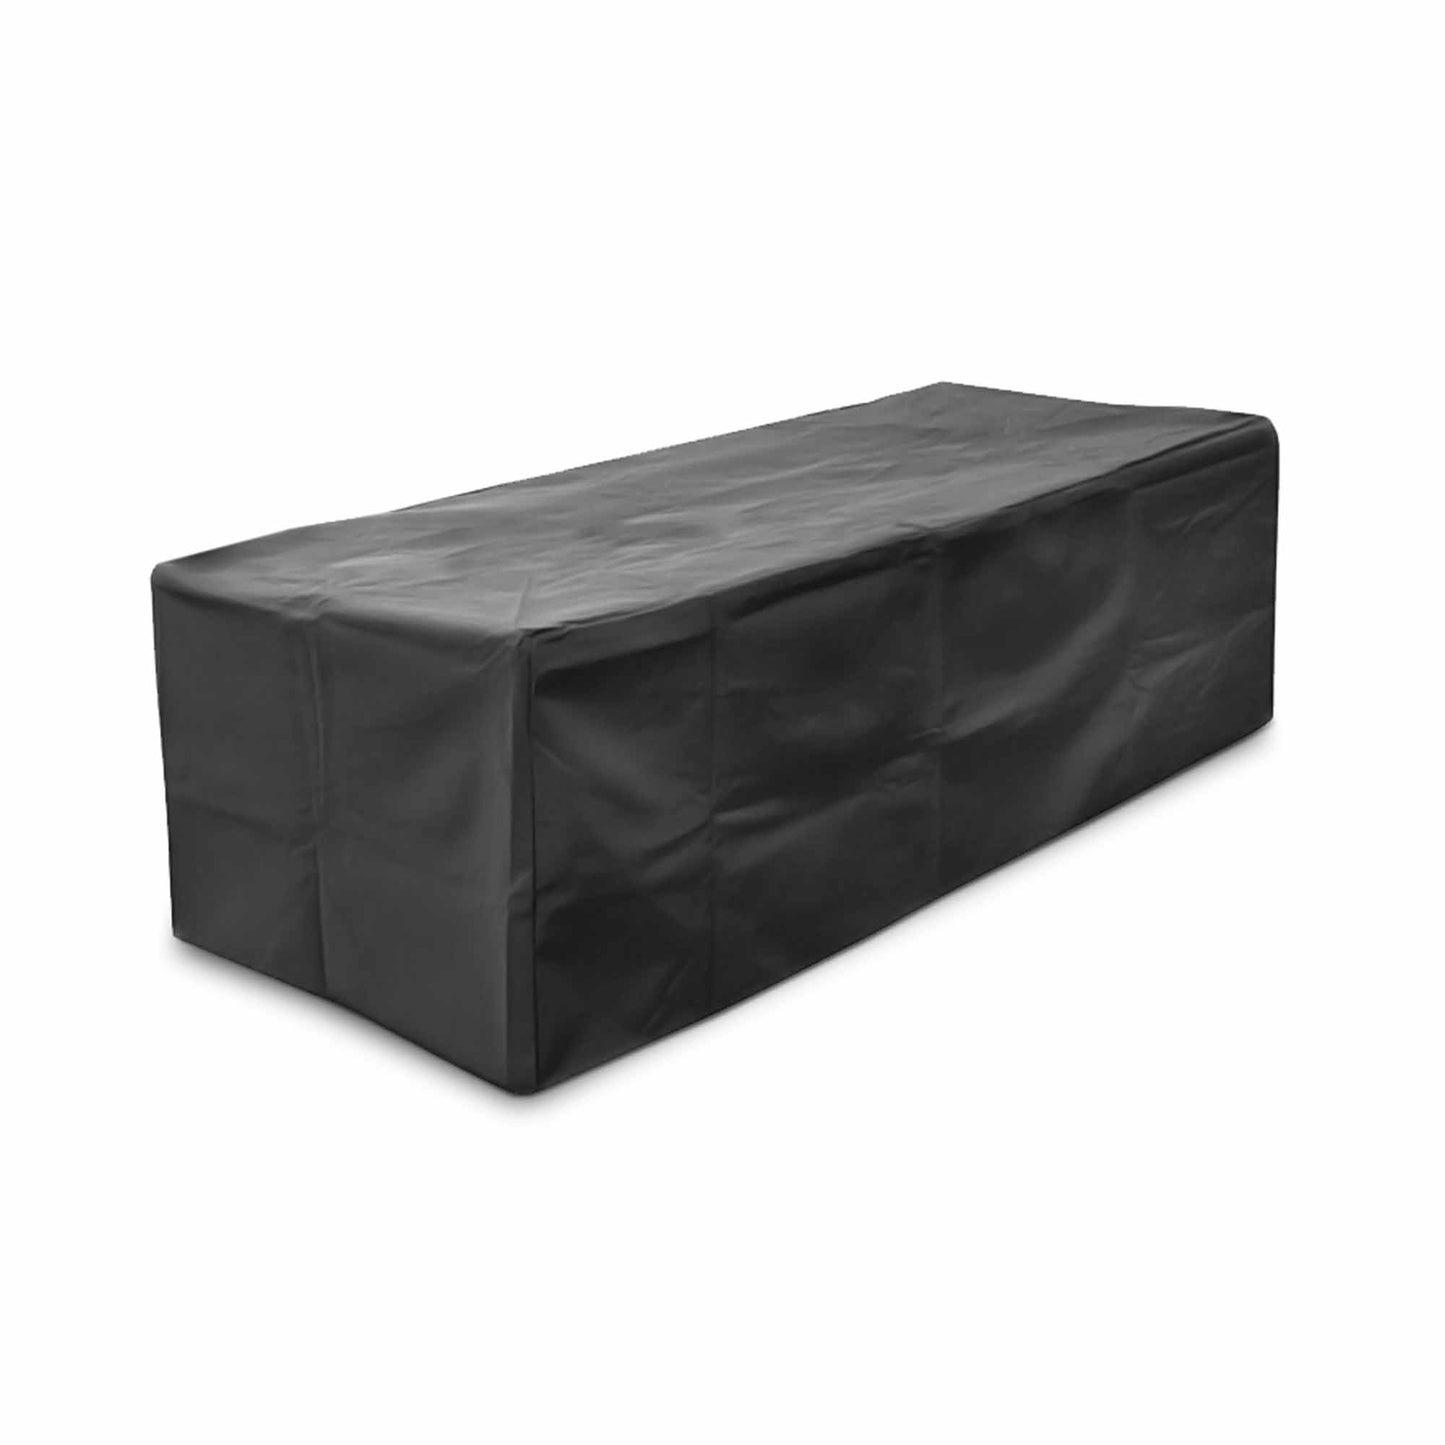 Rectangular Fire Pit Covers - 120" x 60"